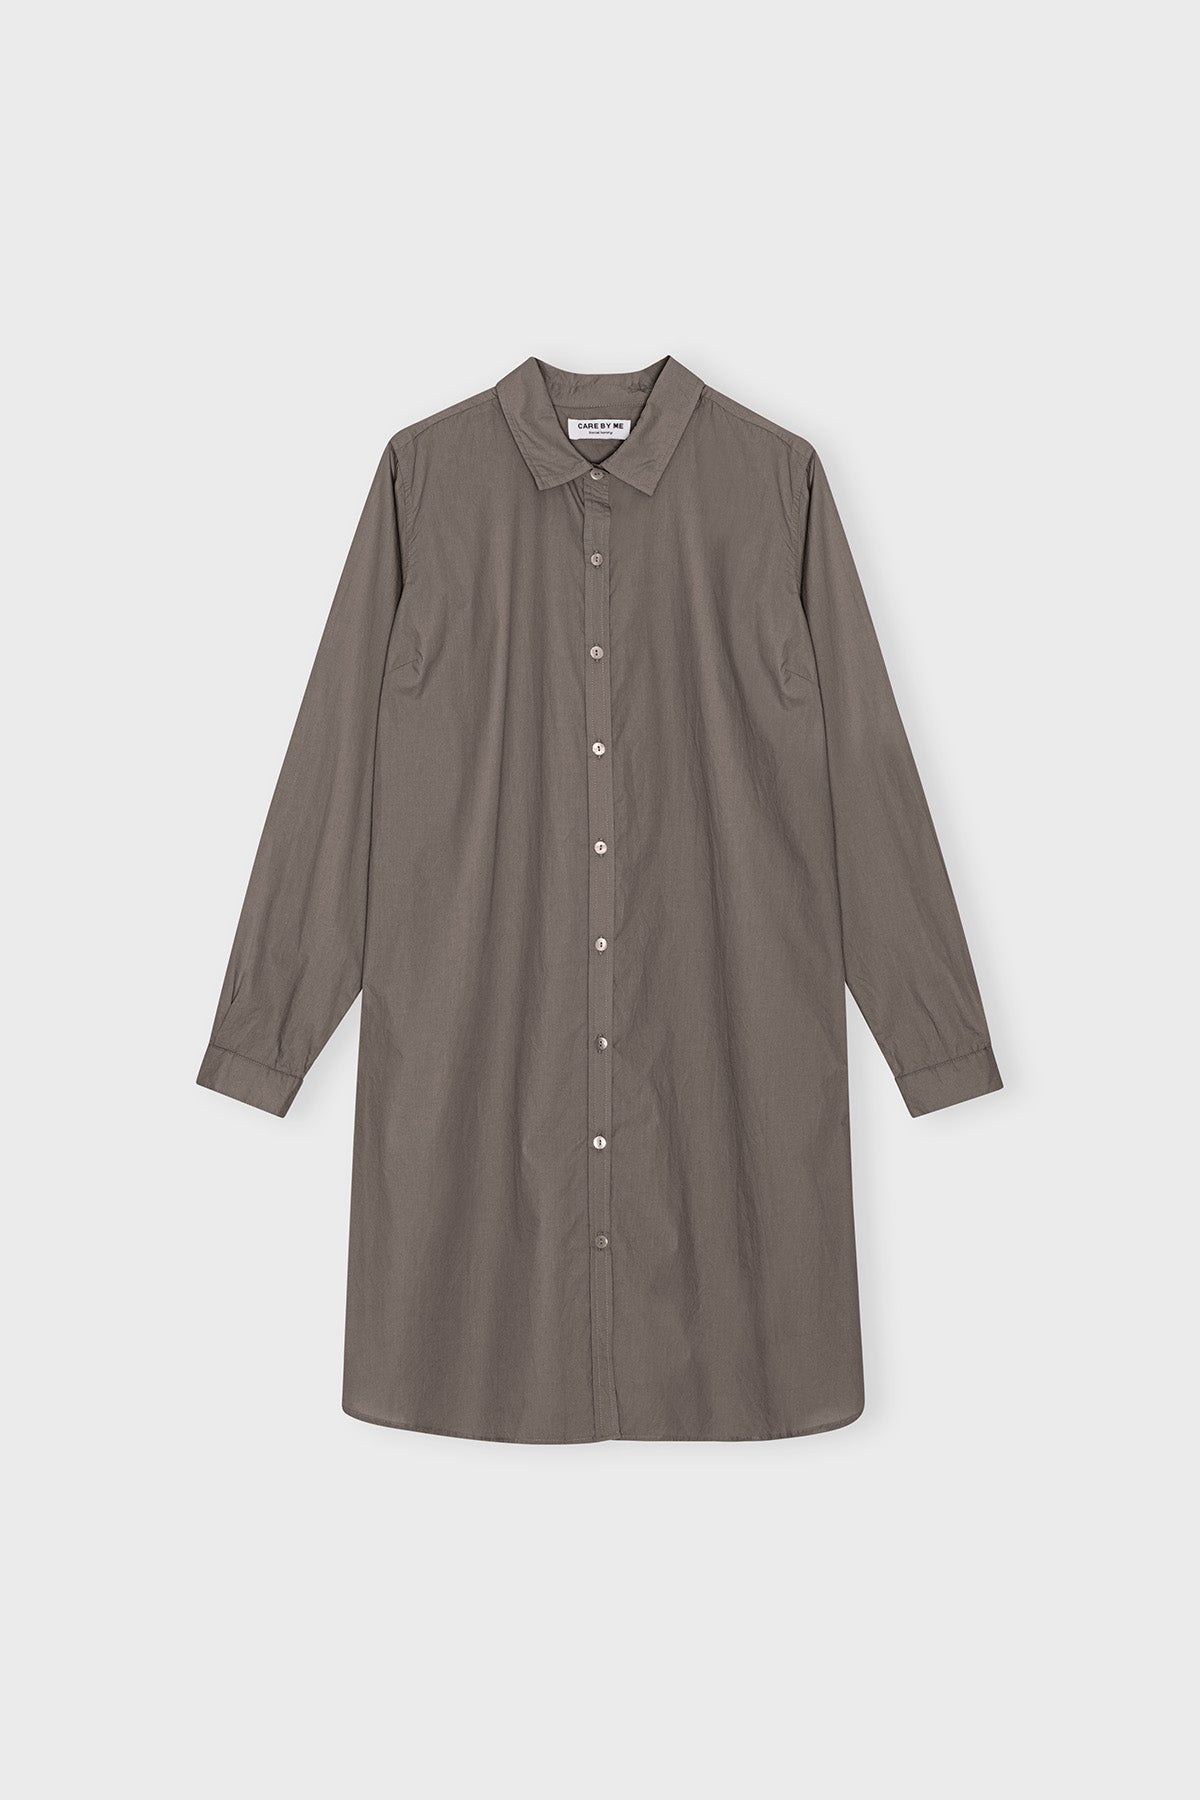 CARE BY ME Laura Long Shirt